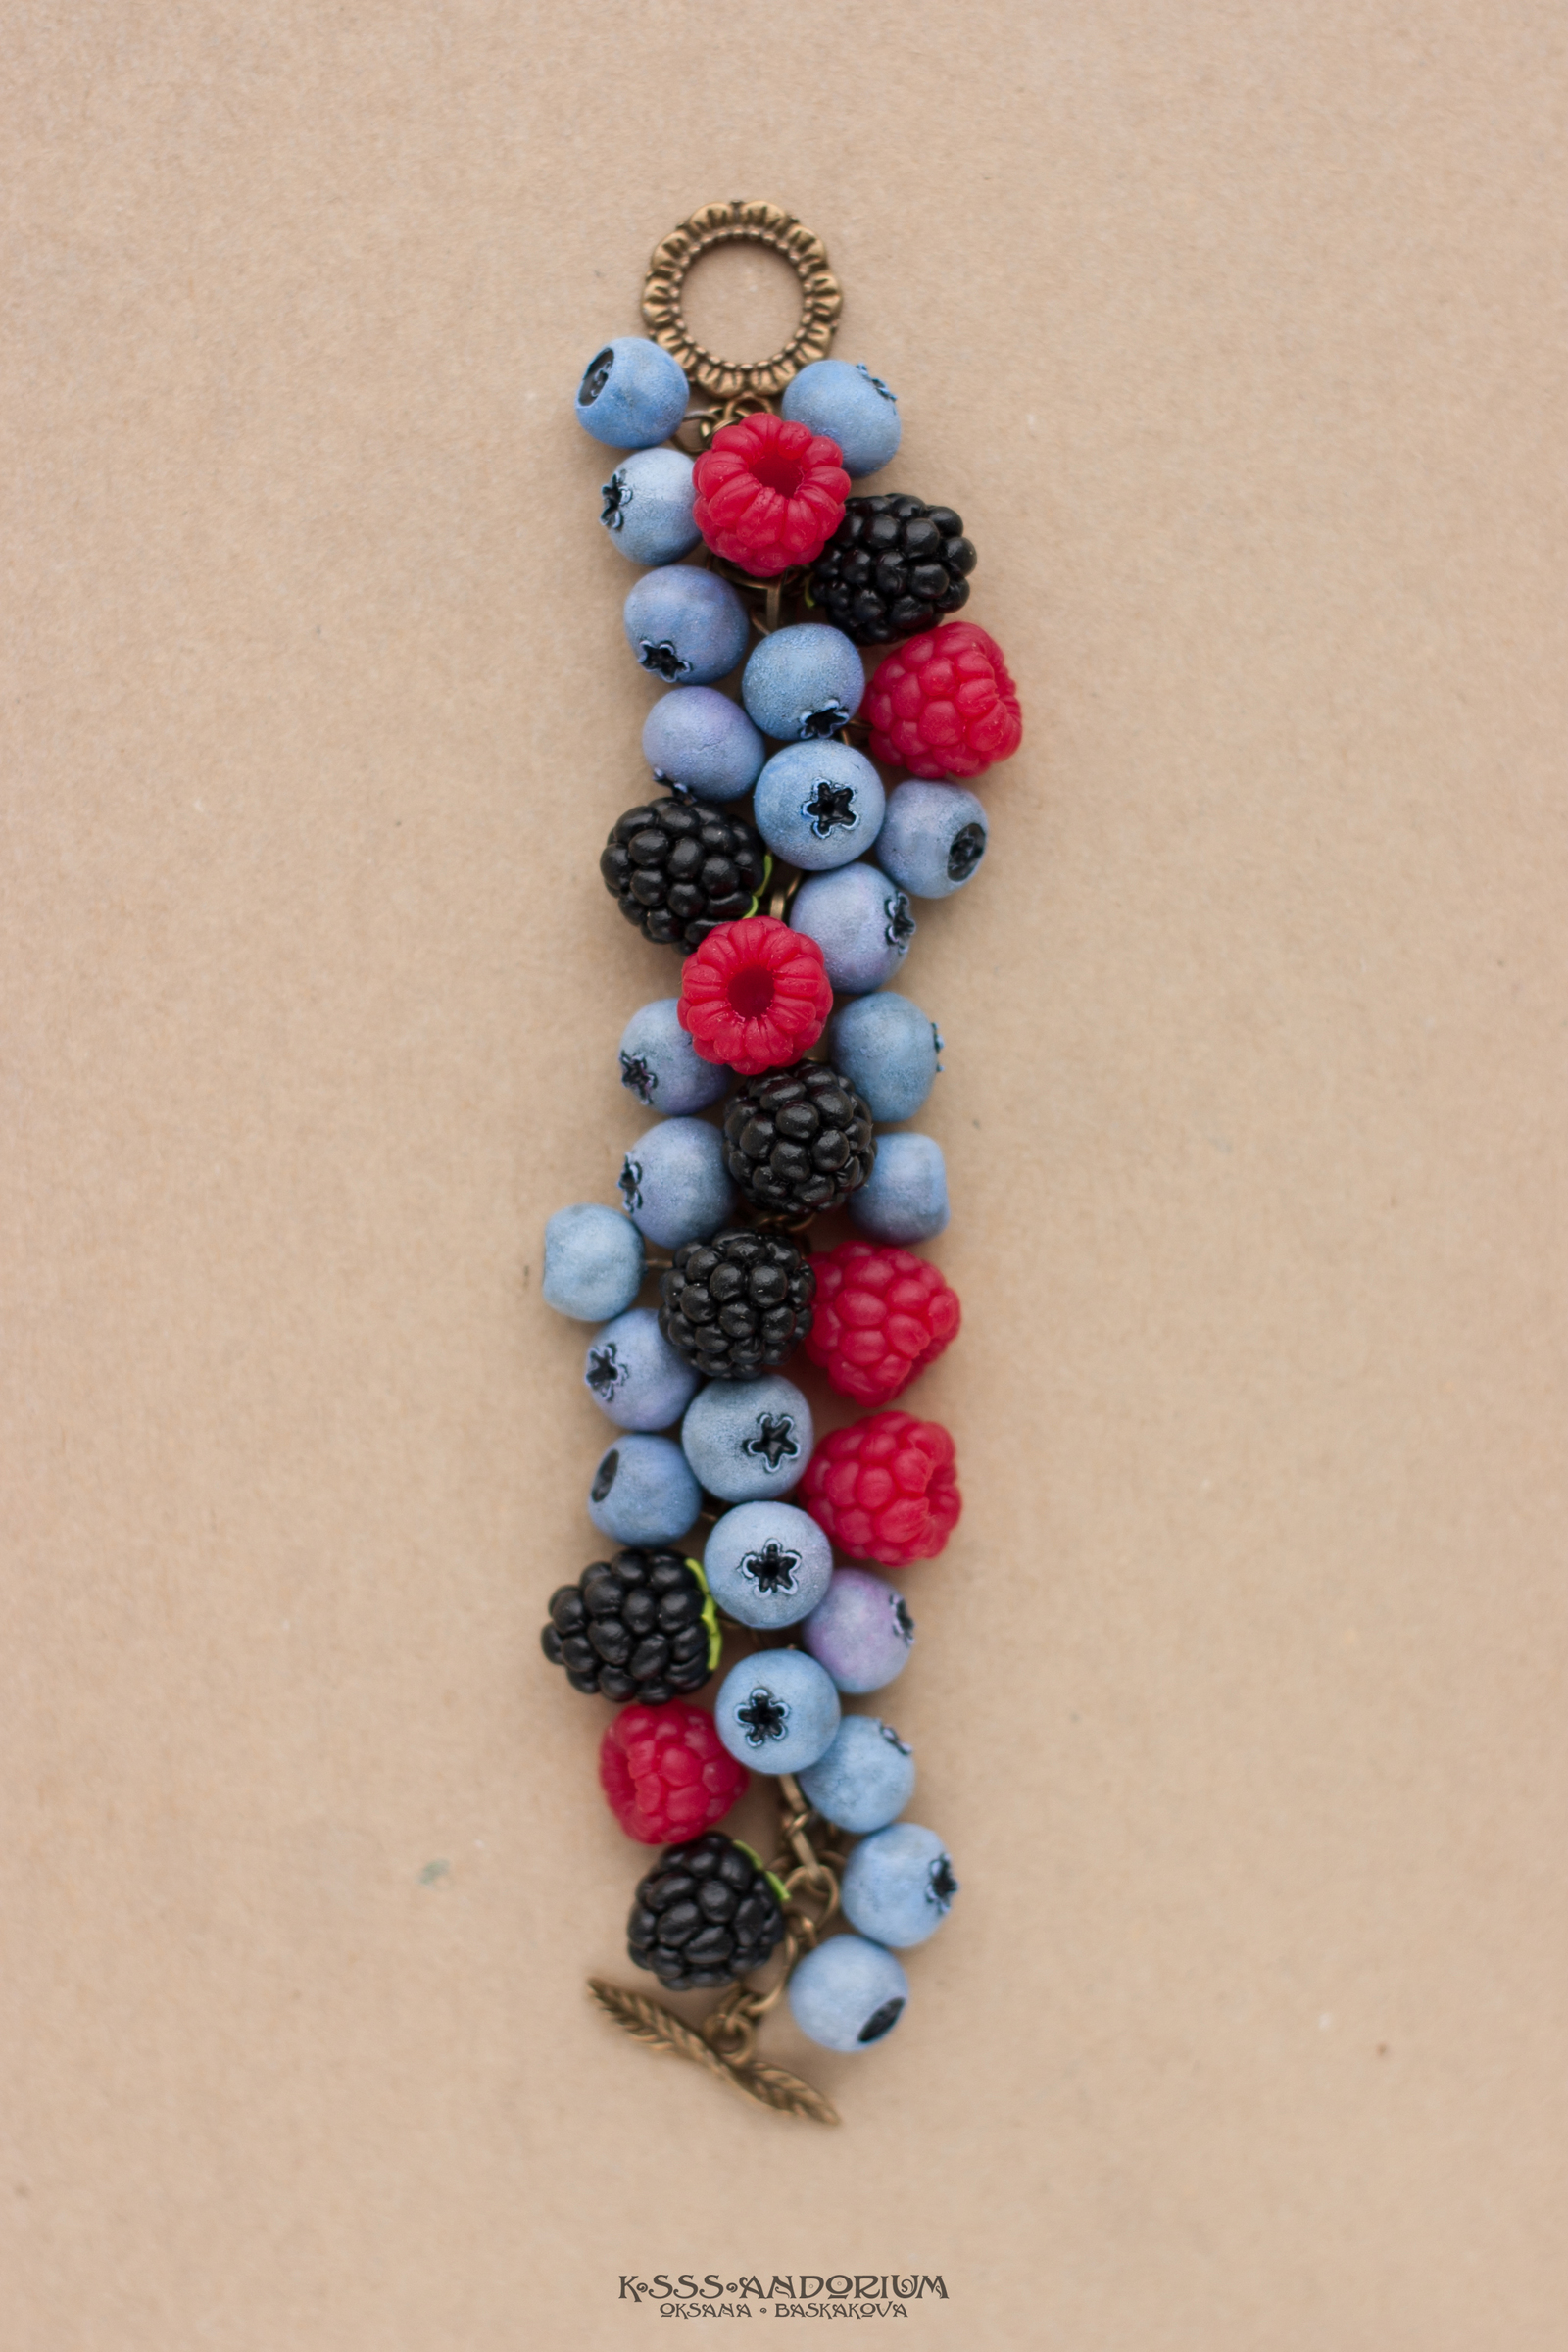 About berries and a variety of bracelets with them; - My, Ksssandorium, Raspberries, Blueberry, Snowberry, Handmade, Polymer clay, Decoration, A bracelet, Longpost